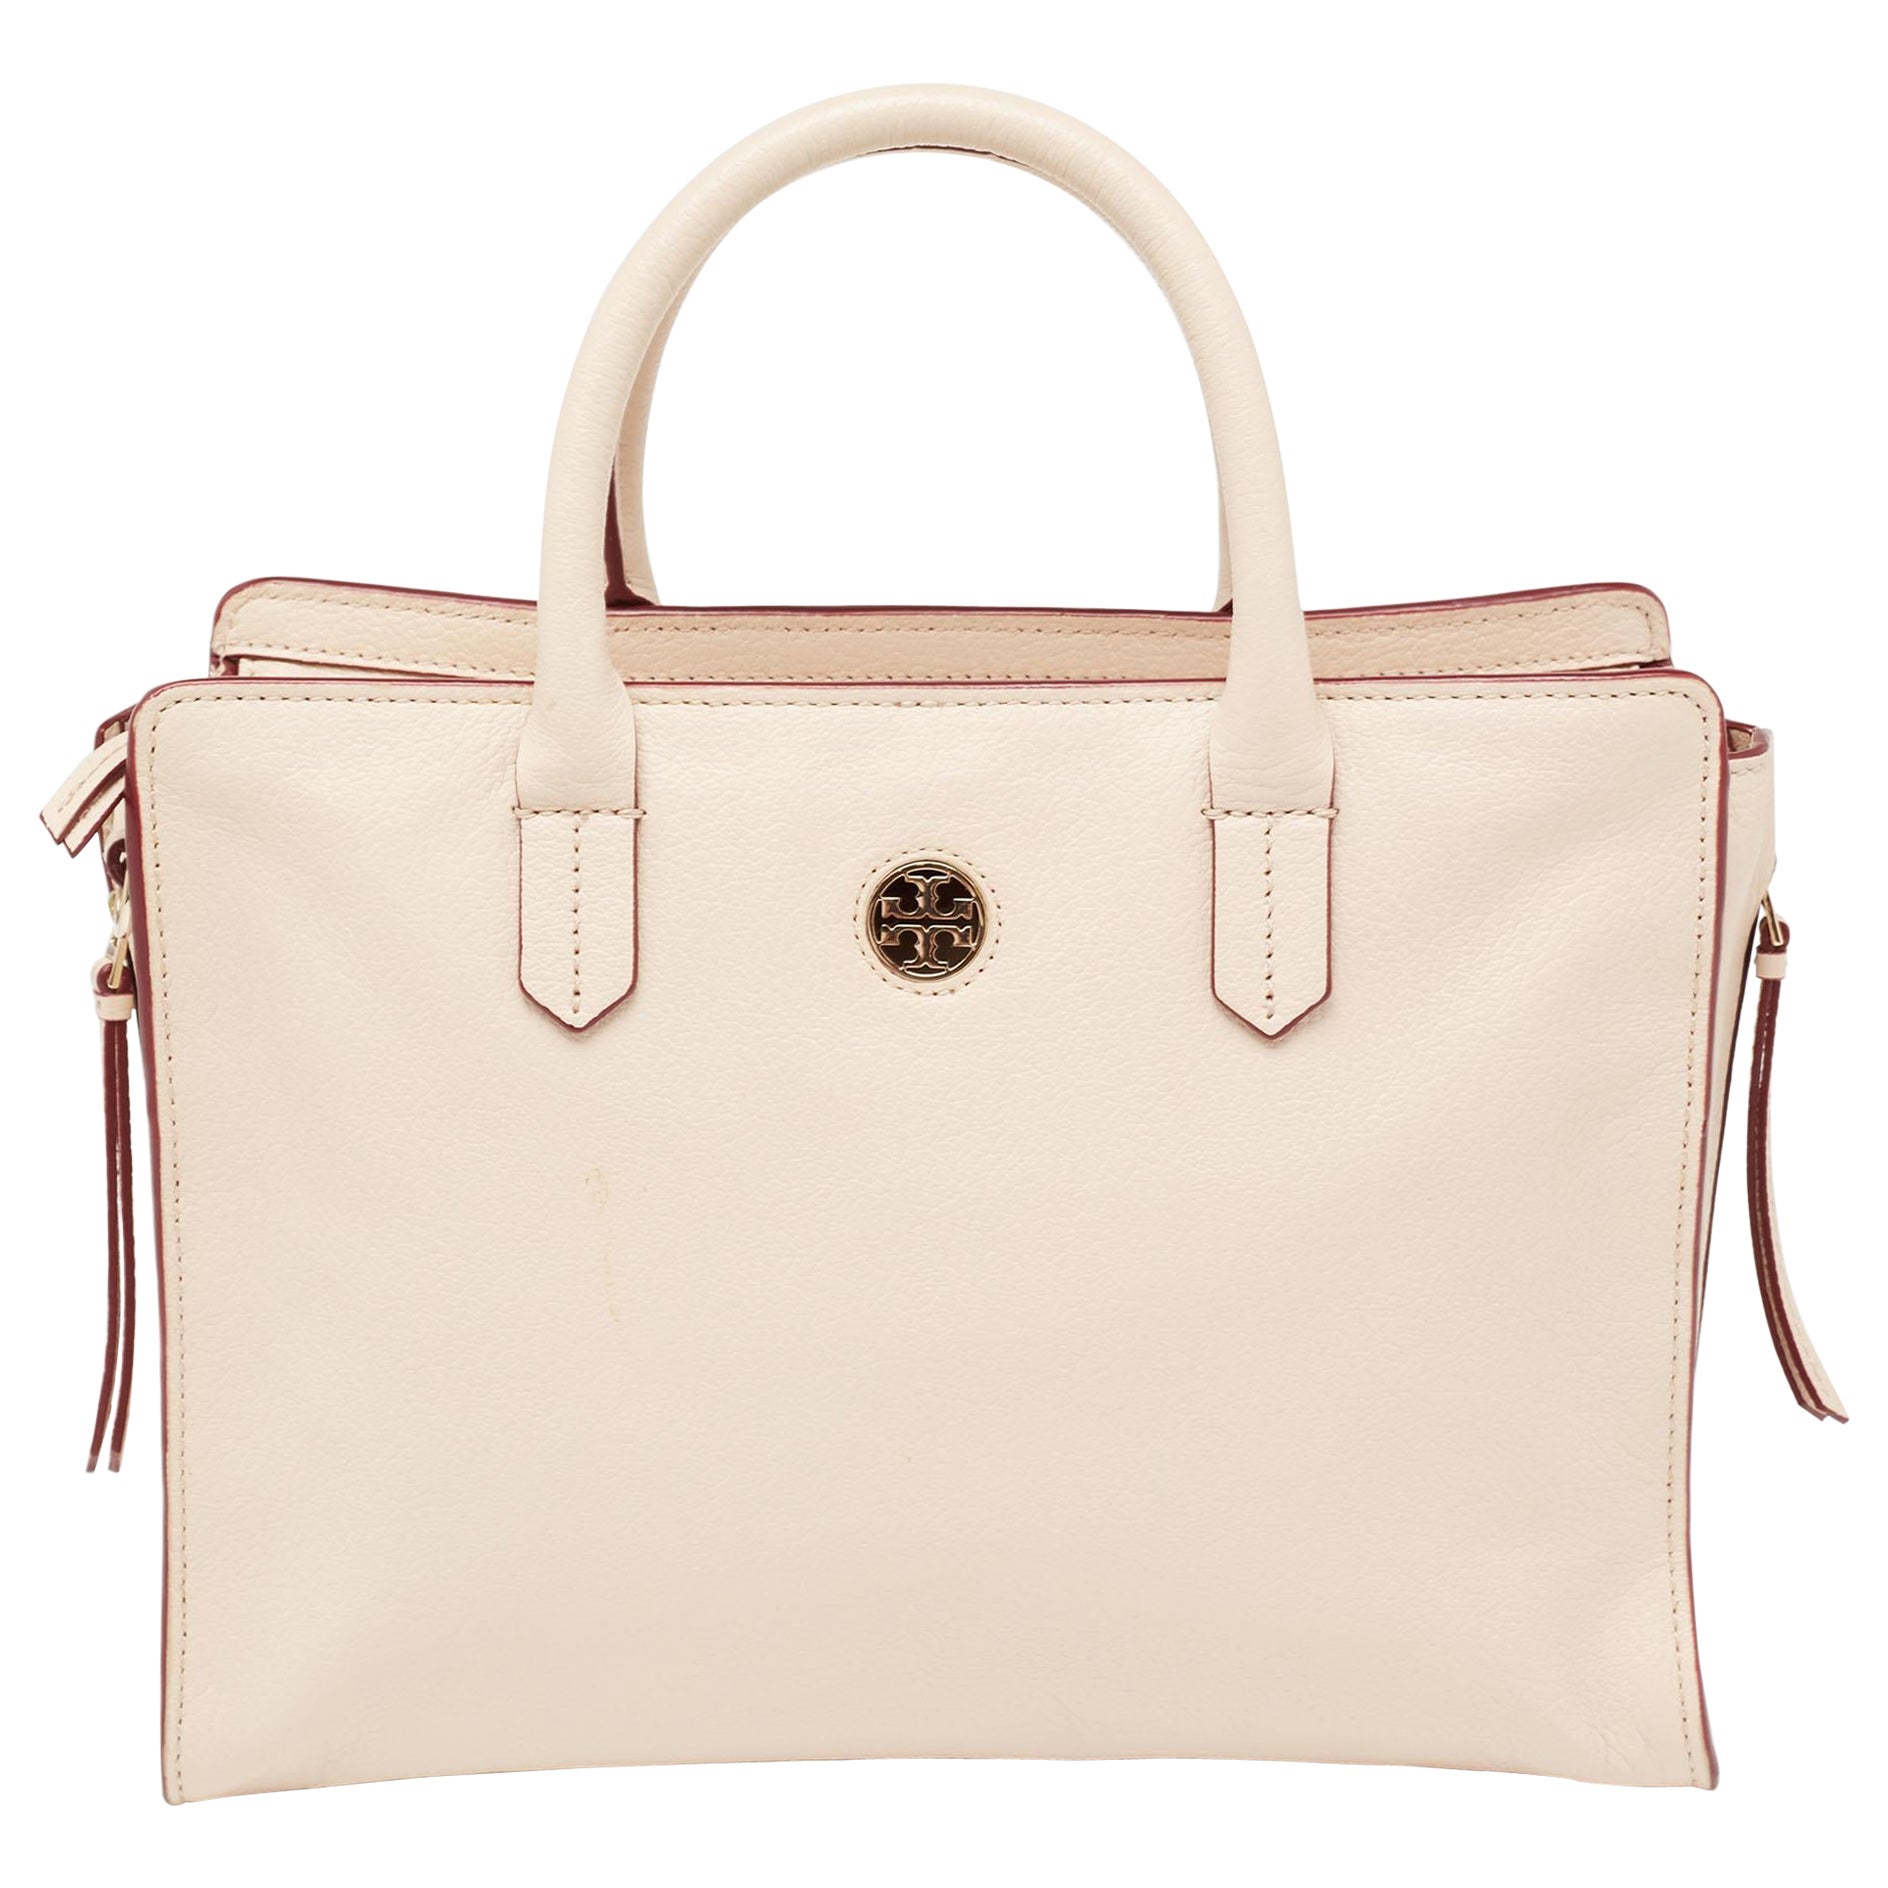 Tory Burch Beige Leather Robinson Tote